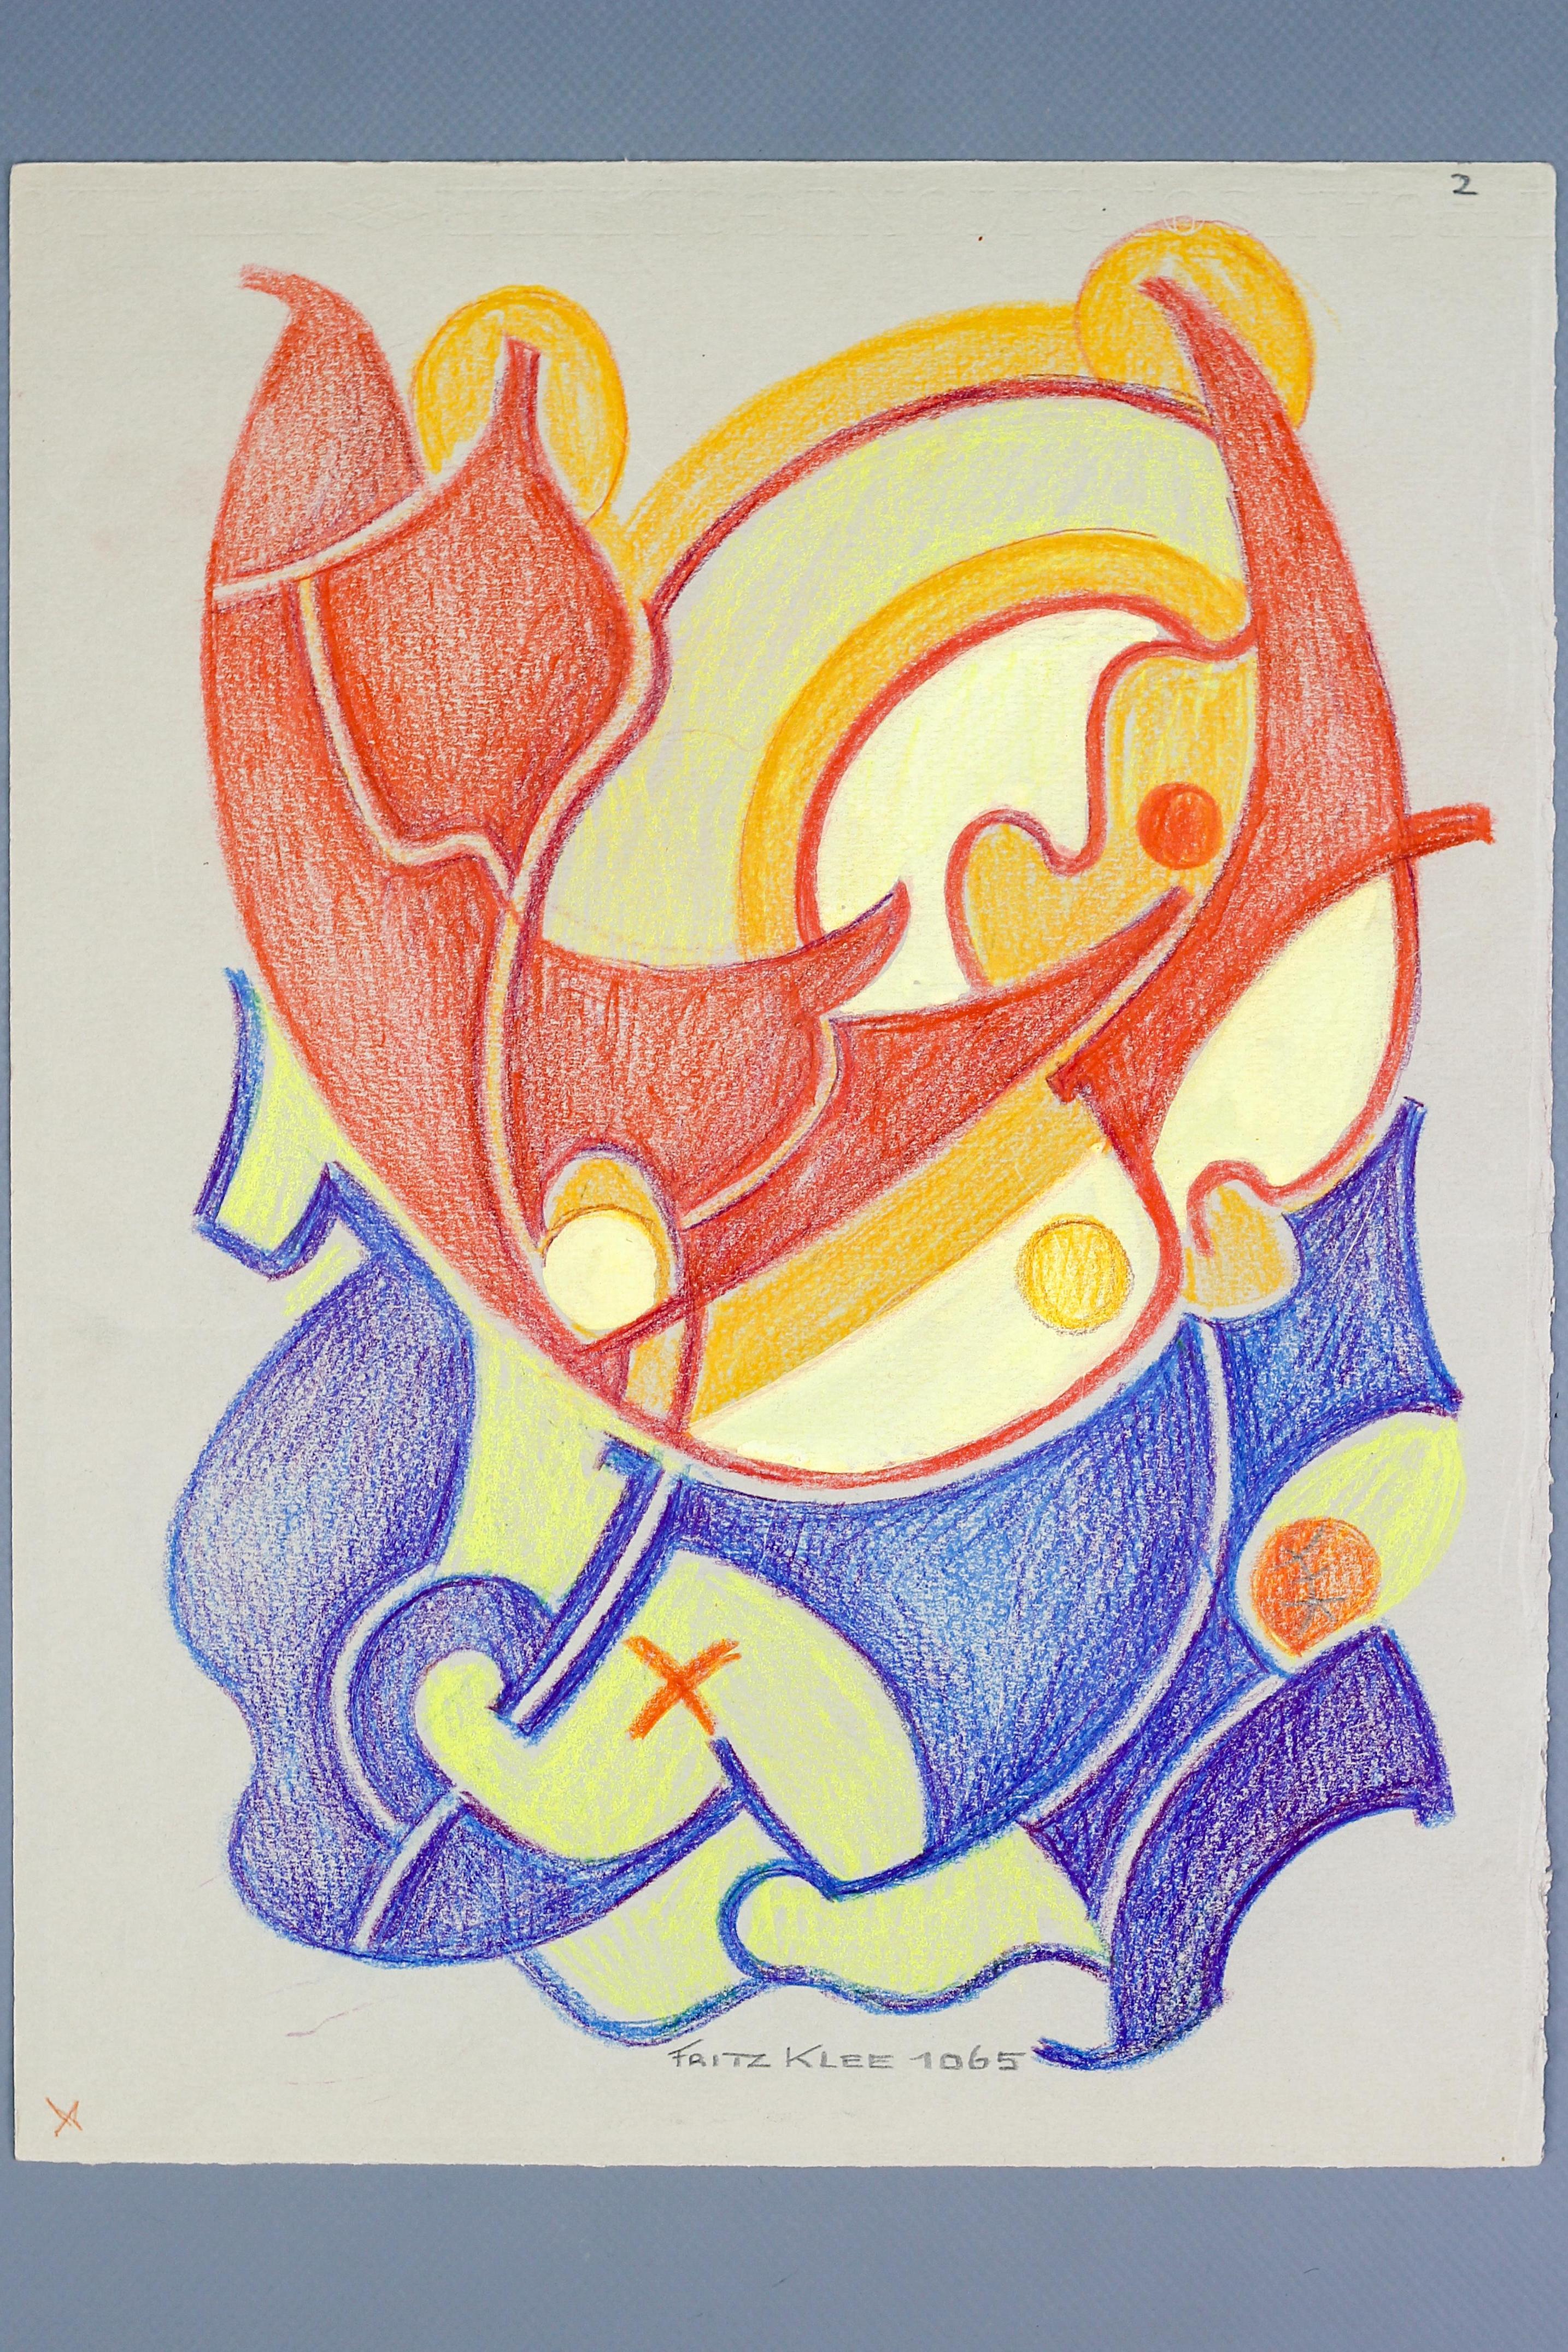 A magnificent abstract organic hand-drawing, a draft of an ornamental composition in strong, bright colors by Fritz Klee. Colored pastels on paper, signed and dated 'Fritz Klee 1965', numbered on top.
Sheet size: 32.5 cm x 25 cm / 12.8 in x 9.84